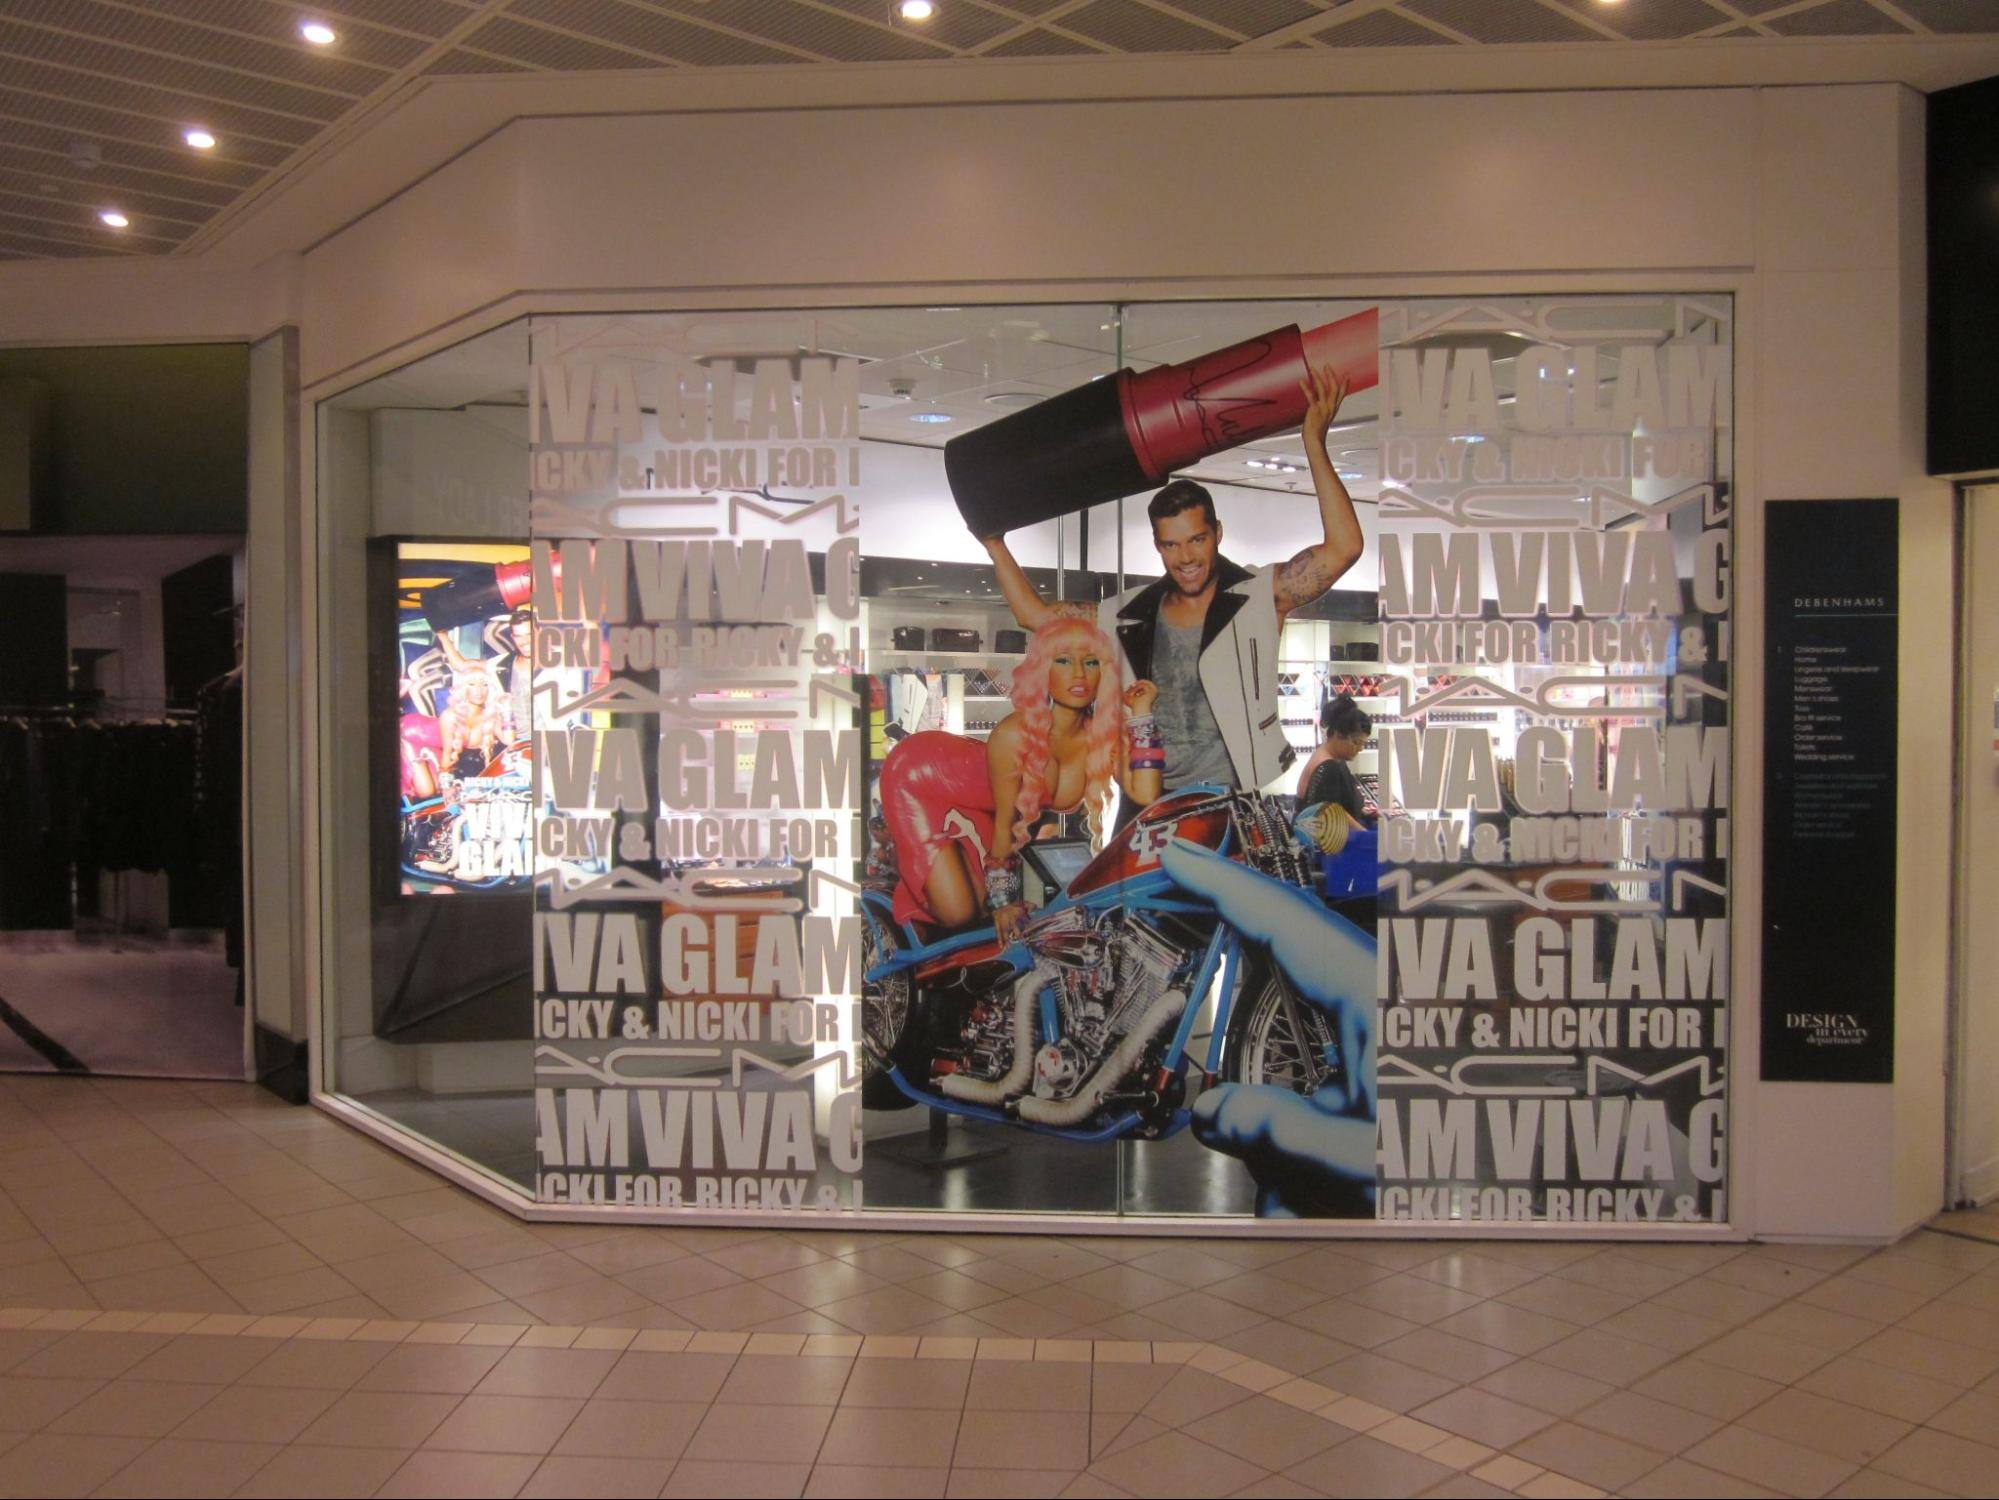 4 Adhesive Window Film Ideas For Retail Storefronts